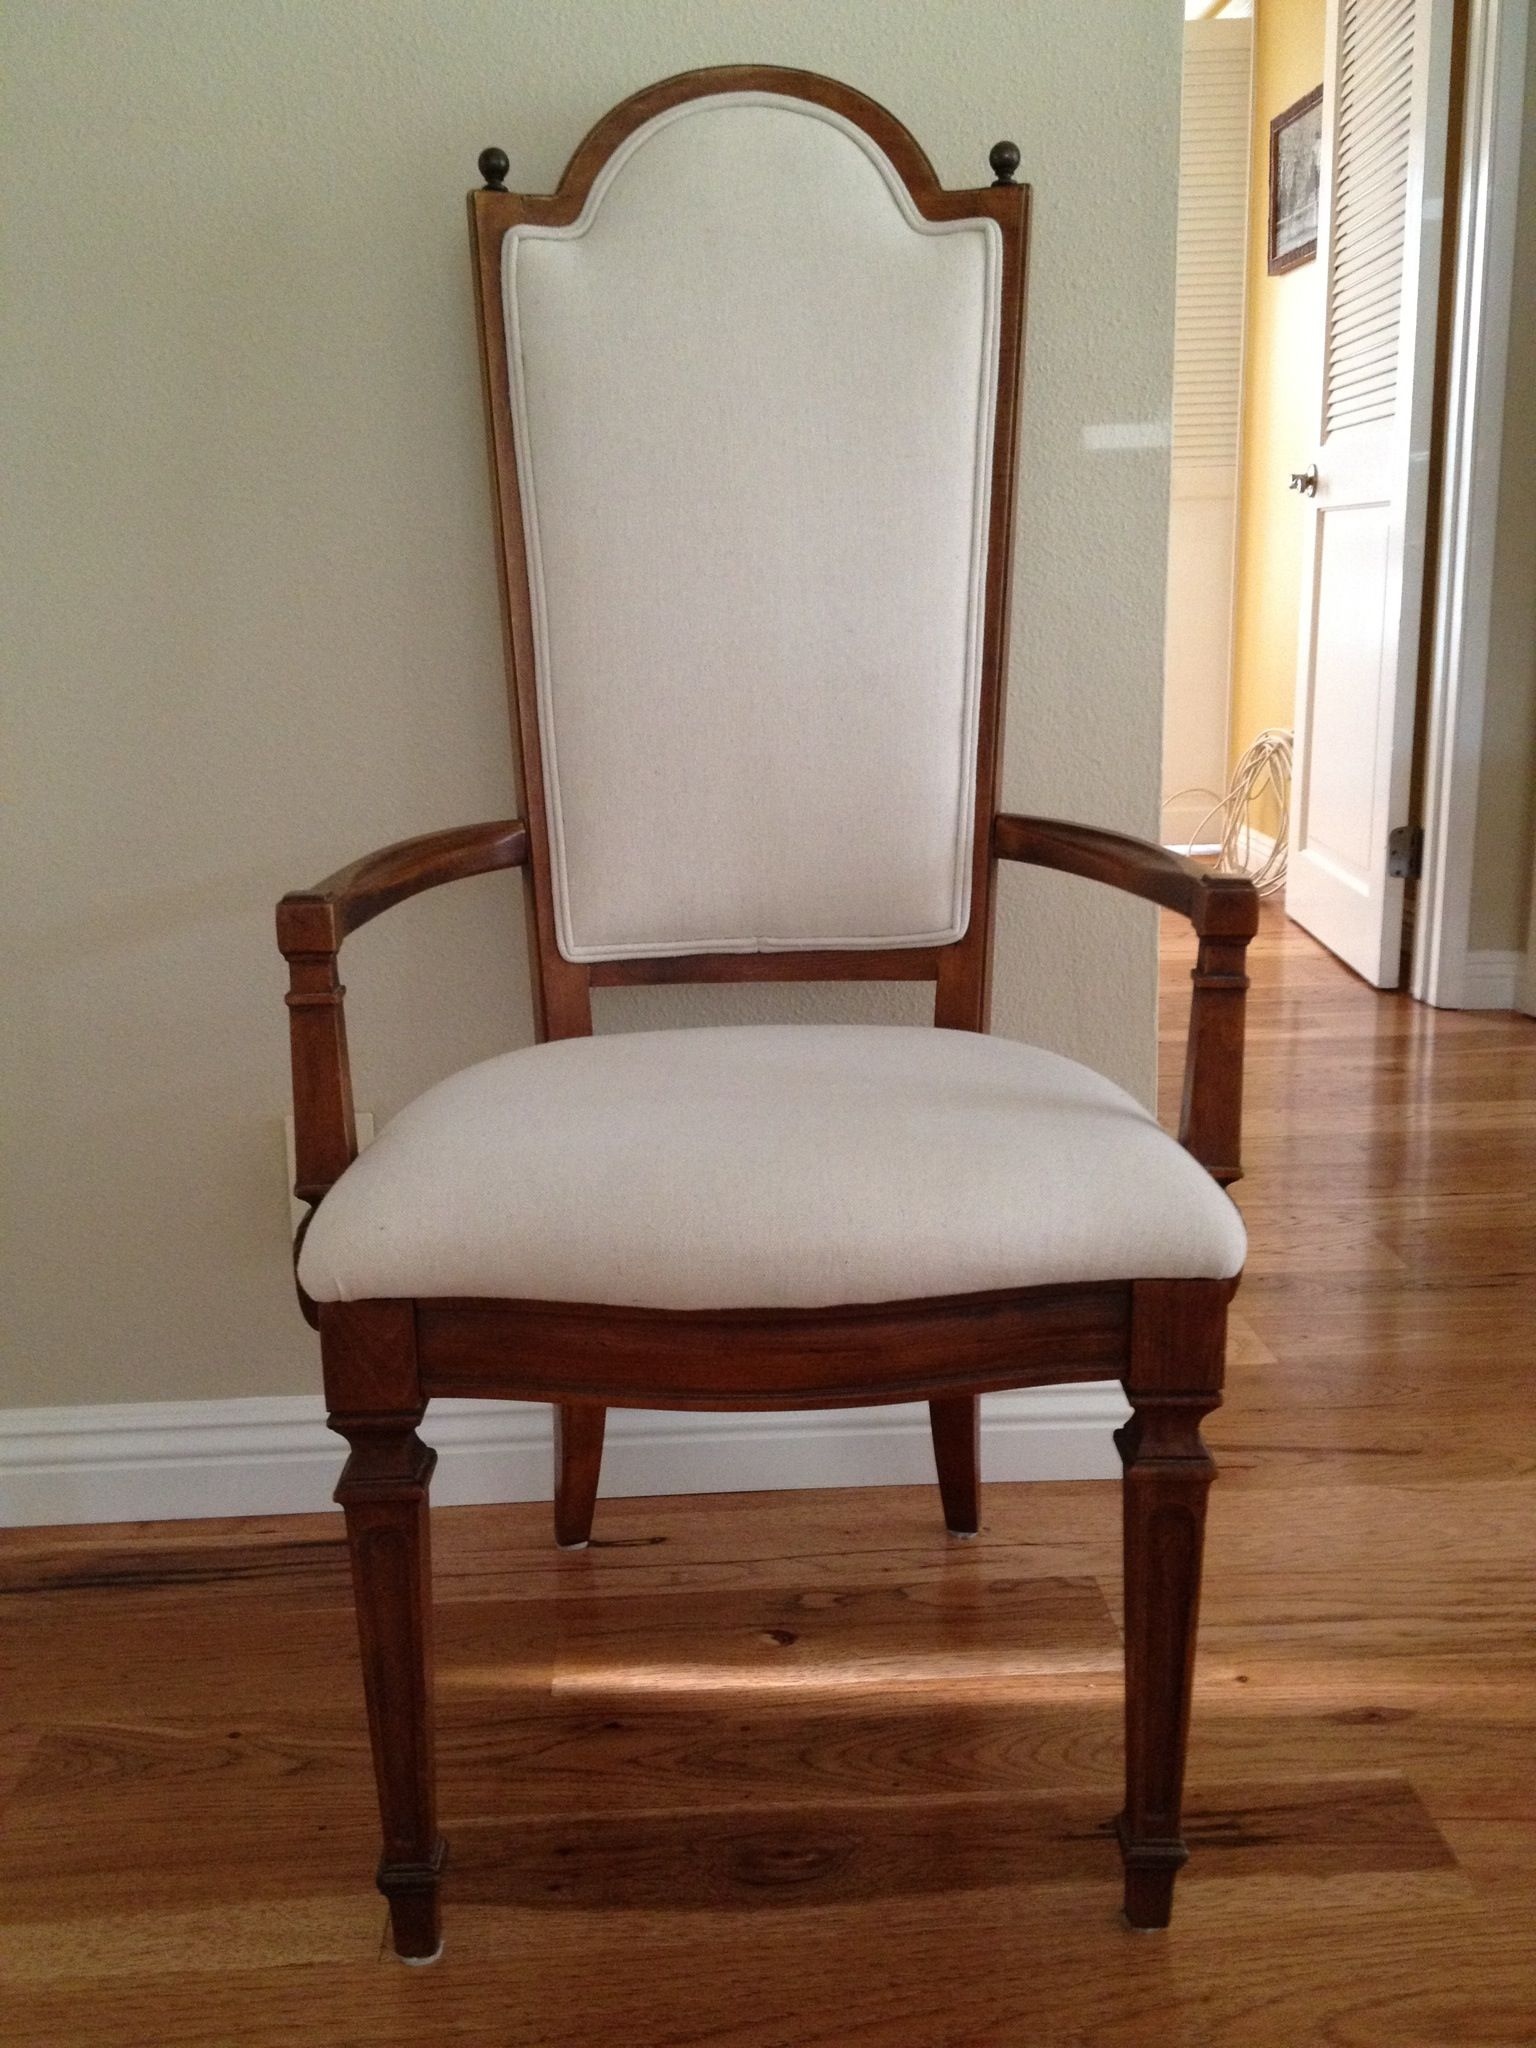 Thomasville Dining Room Chair That Had Torn Cane Back And regarding dimensions 1536 X 2048